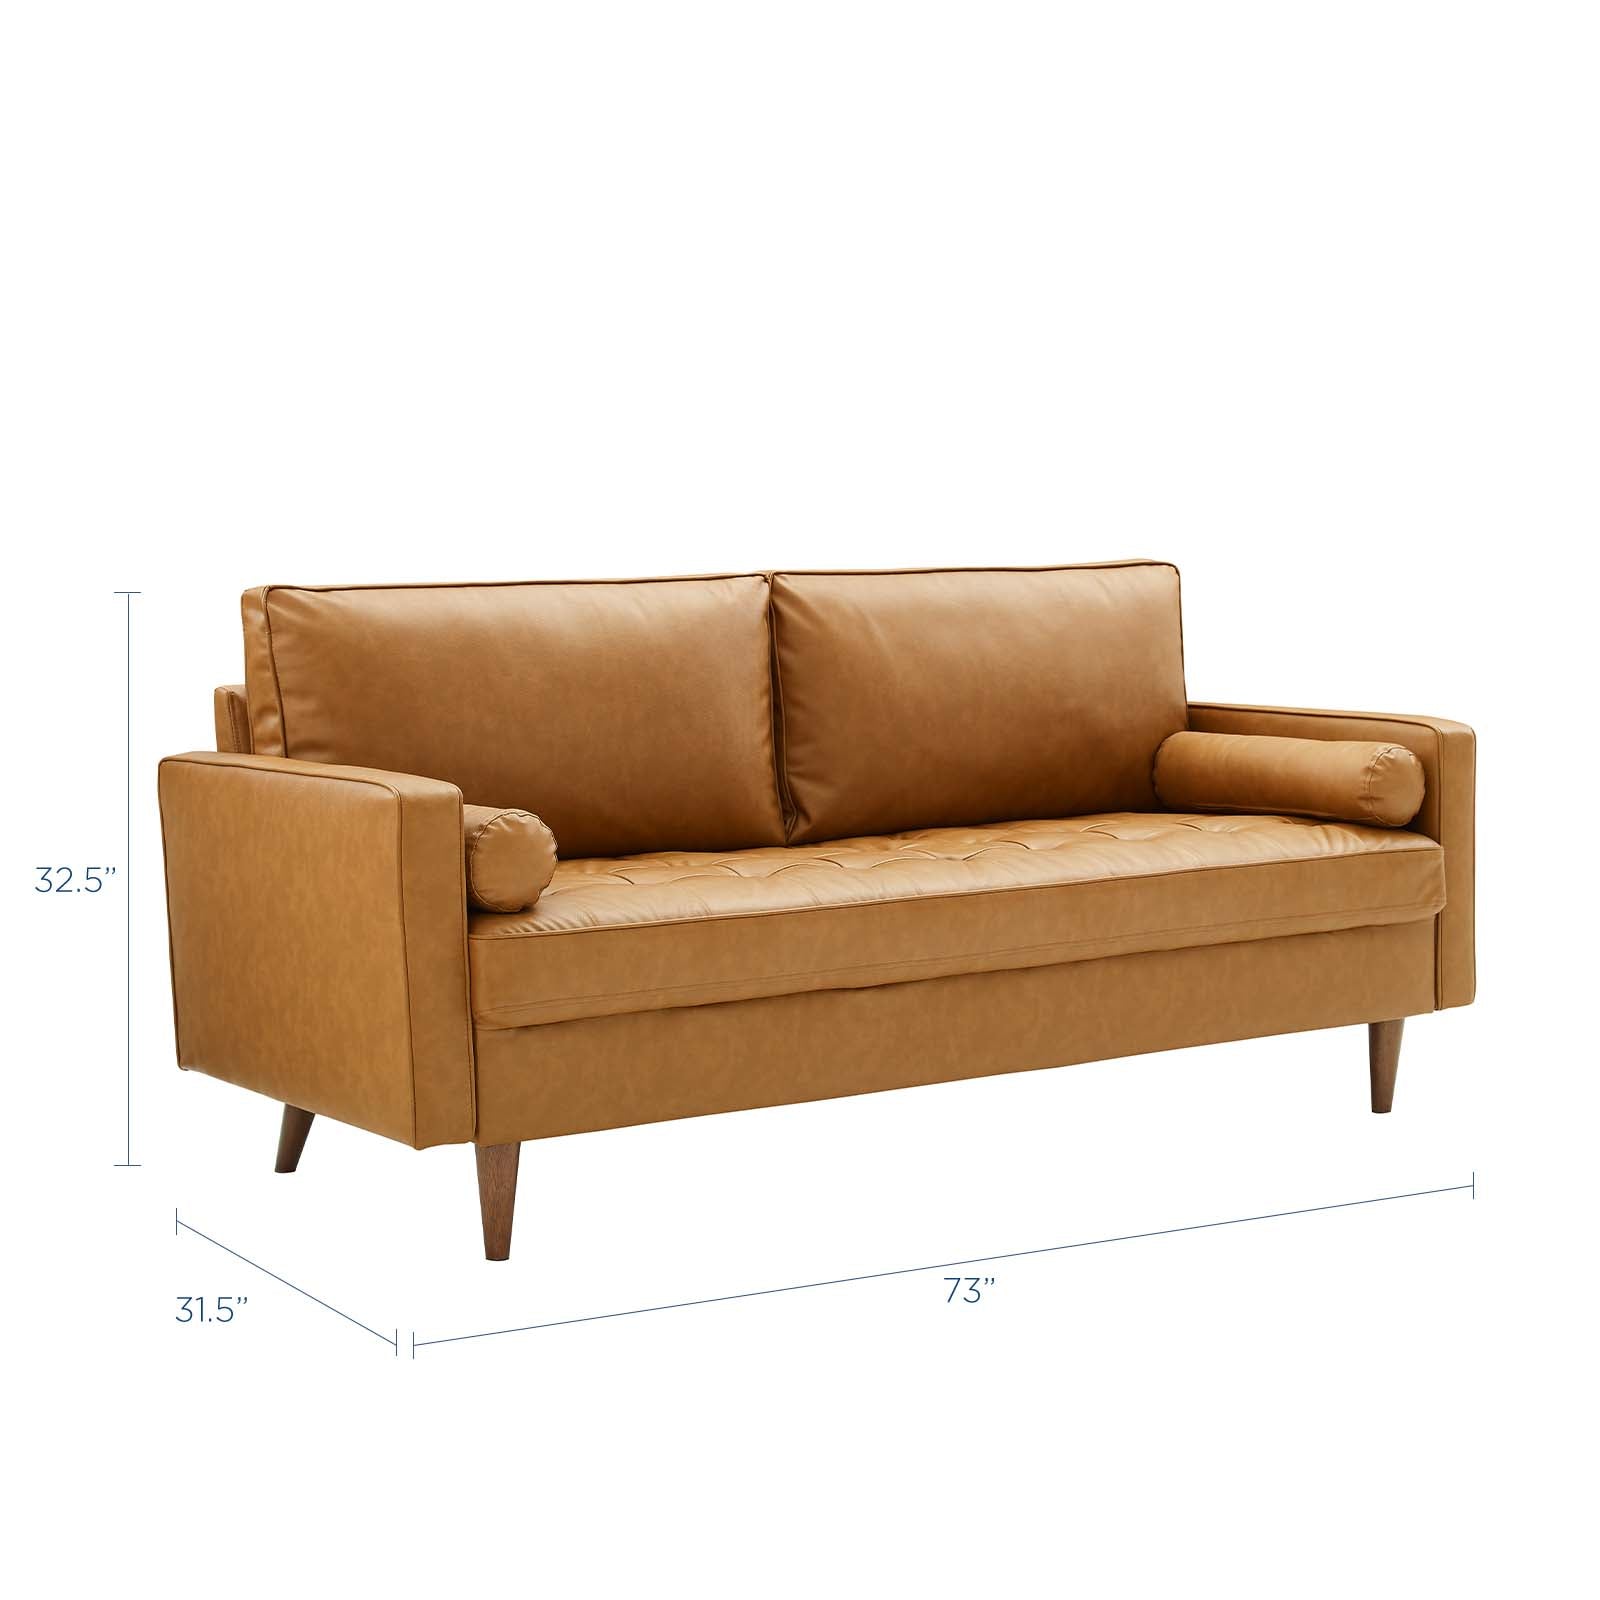 Valour Upholstered Faux Leather Sofa - East Shore Modern Home Furnishings